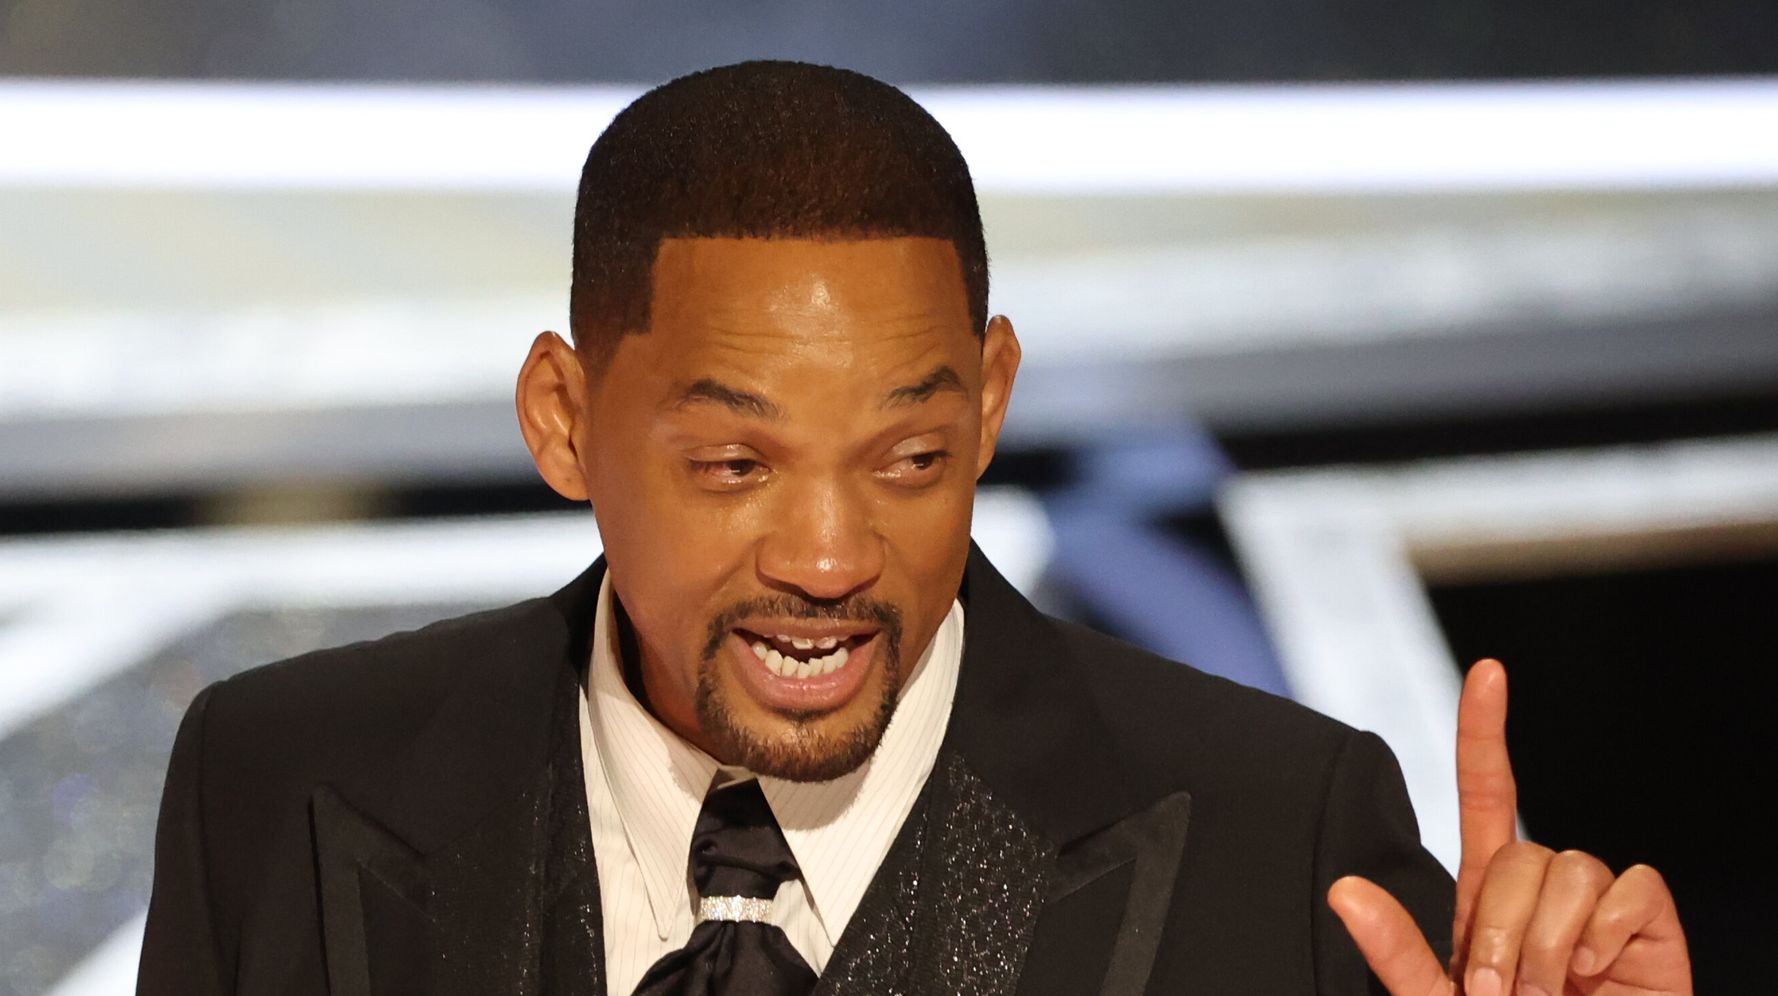 Why Did The Oscars Audience Give Will Smith A Standing Ovation? Here's 1 Theory.